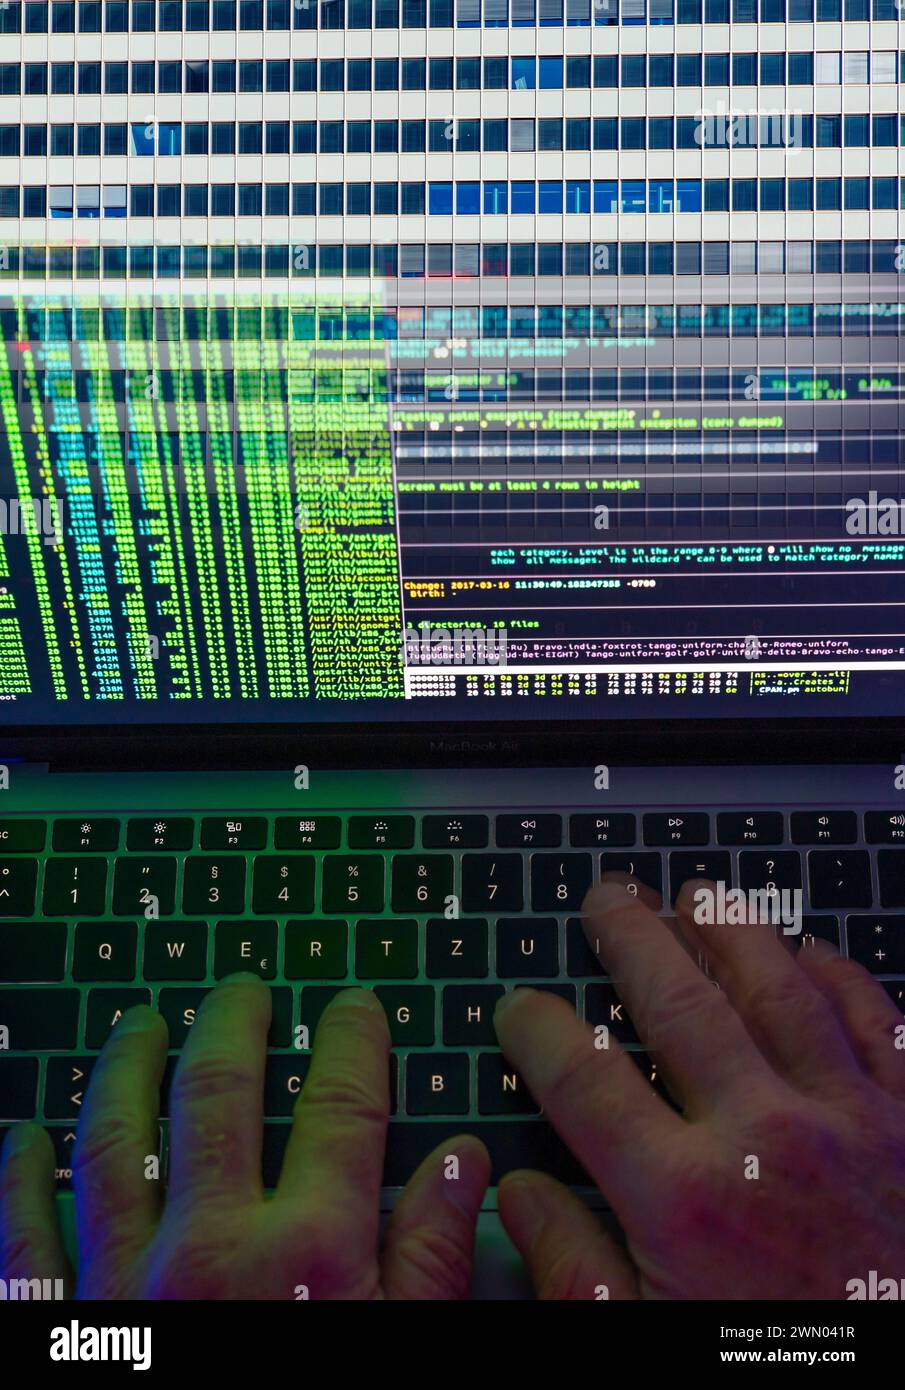 Symbolic image hacker, cyberattack on public buildings, administrations, institutions, town hall, authorities, digital blackmail, data theft, online c Stock Photo